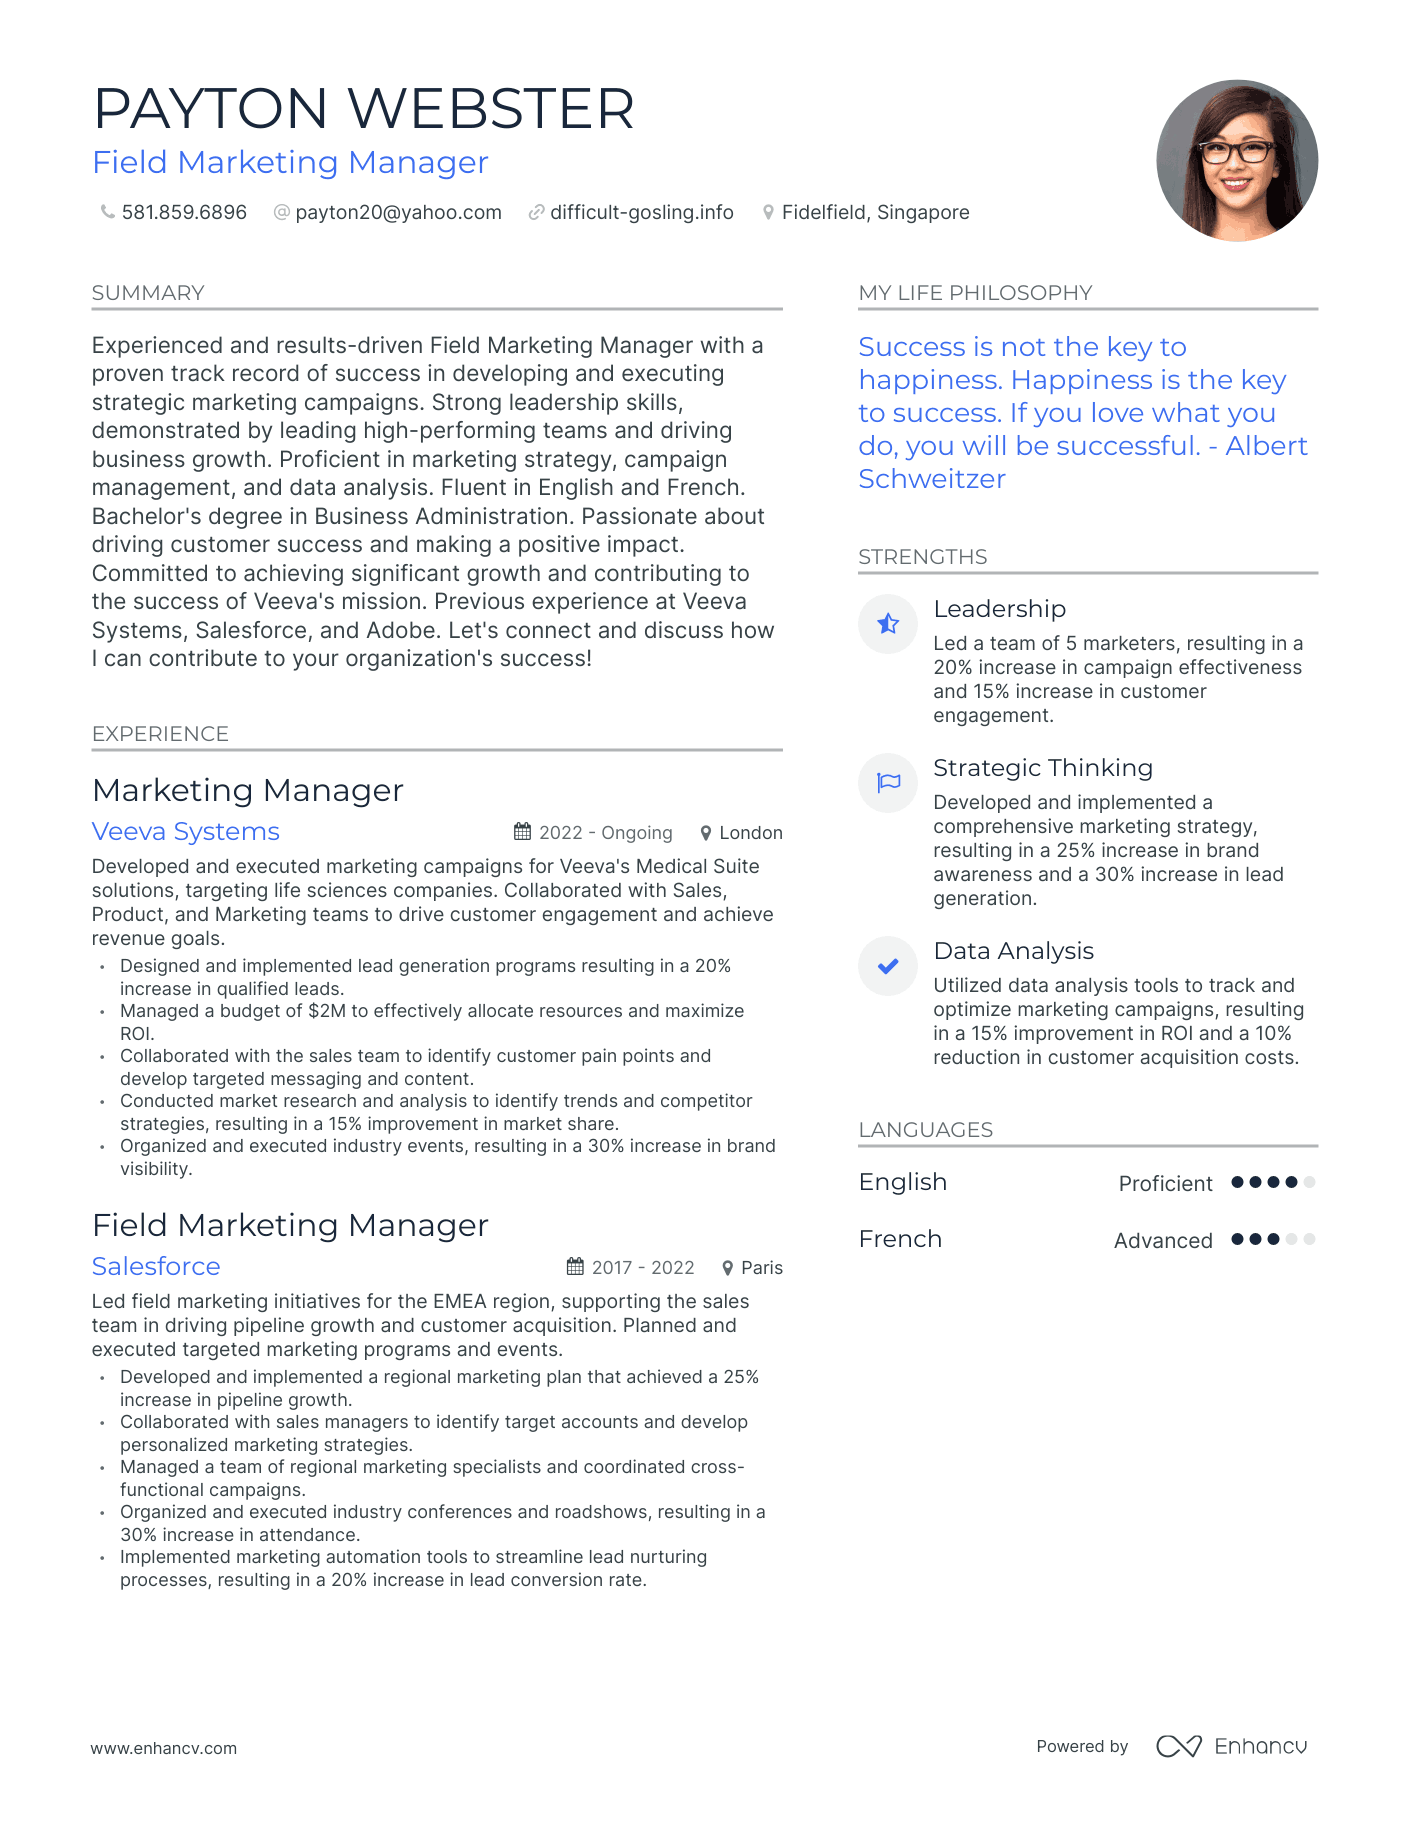 Field Marketing Manager resume example